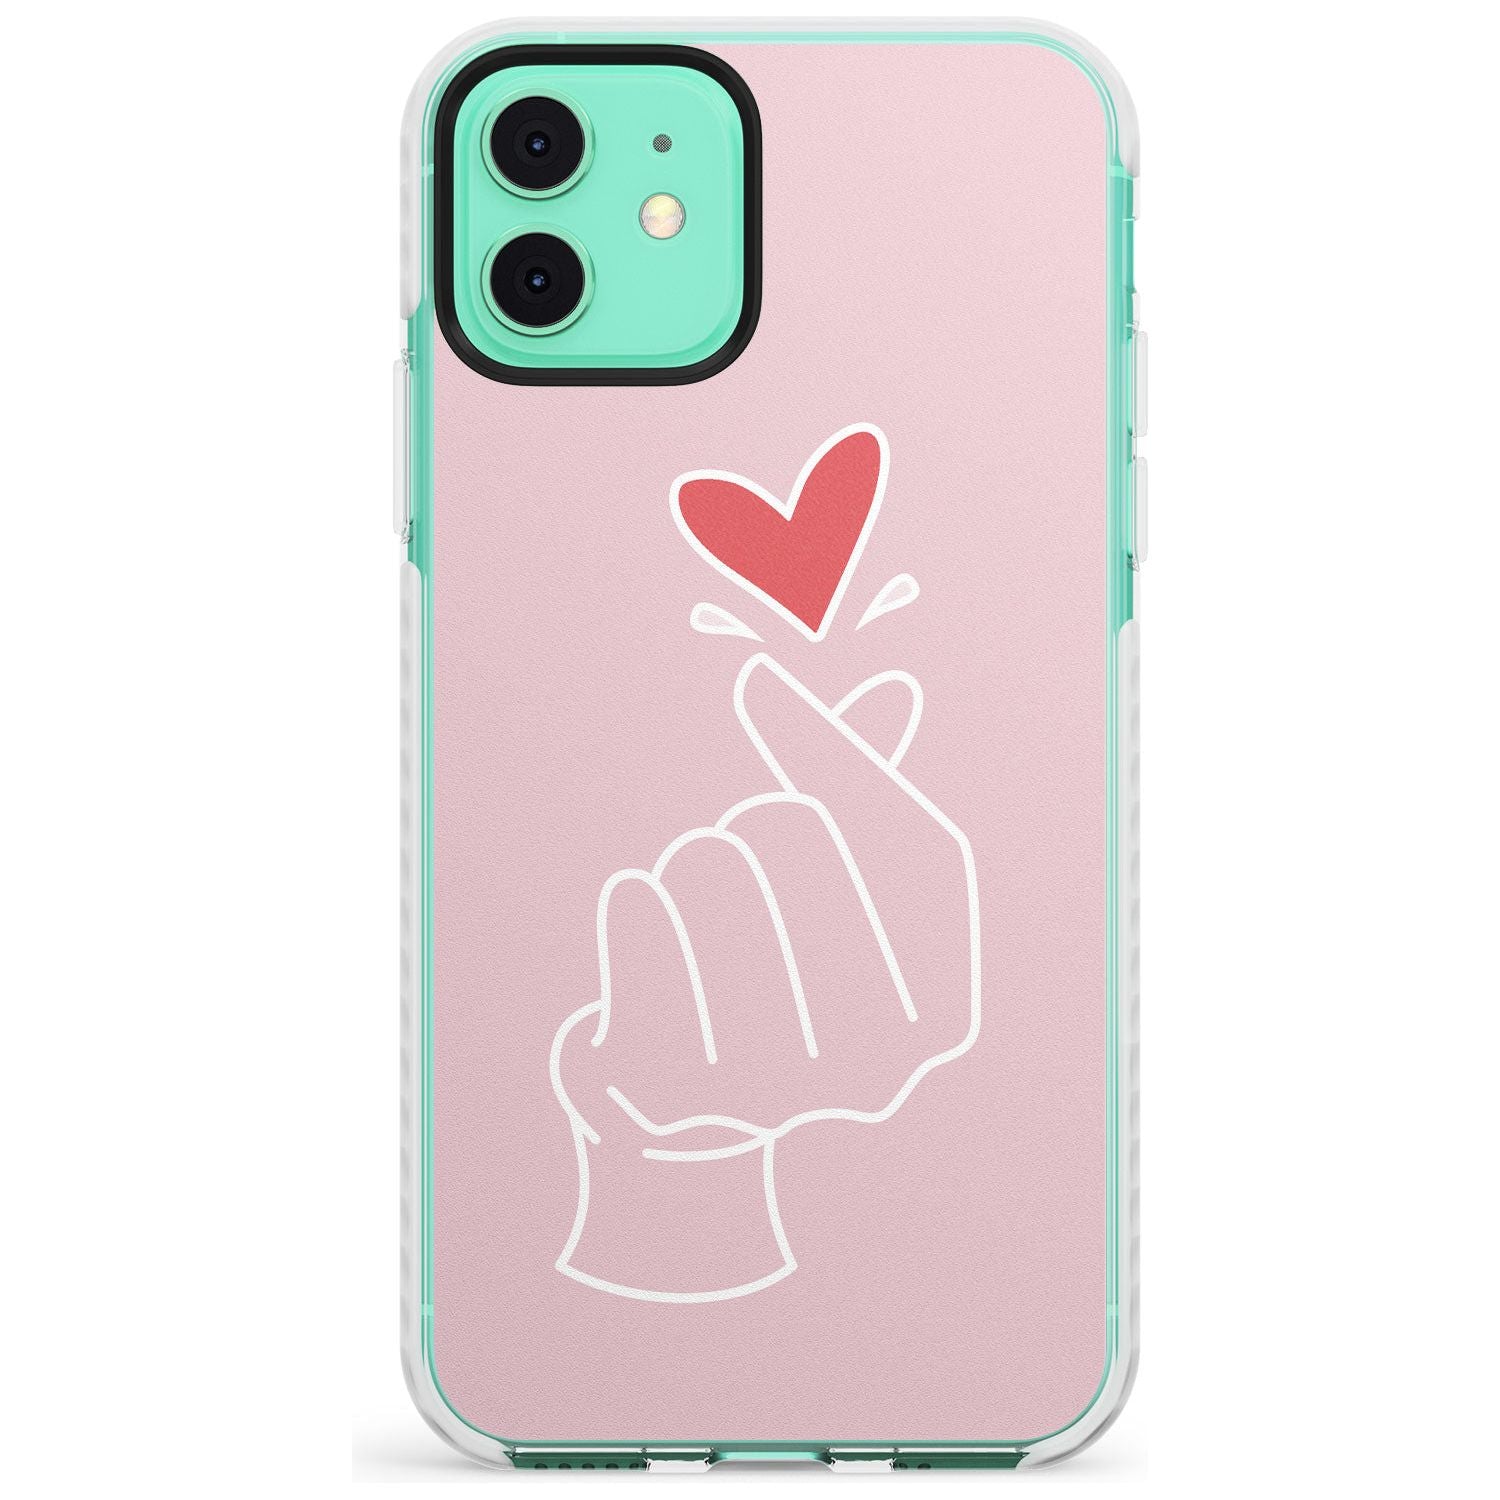 Finger Heart in Pink Slim TPU Phone Case for iPhone 11